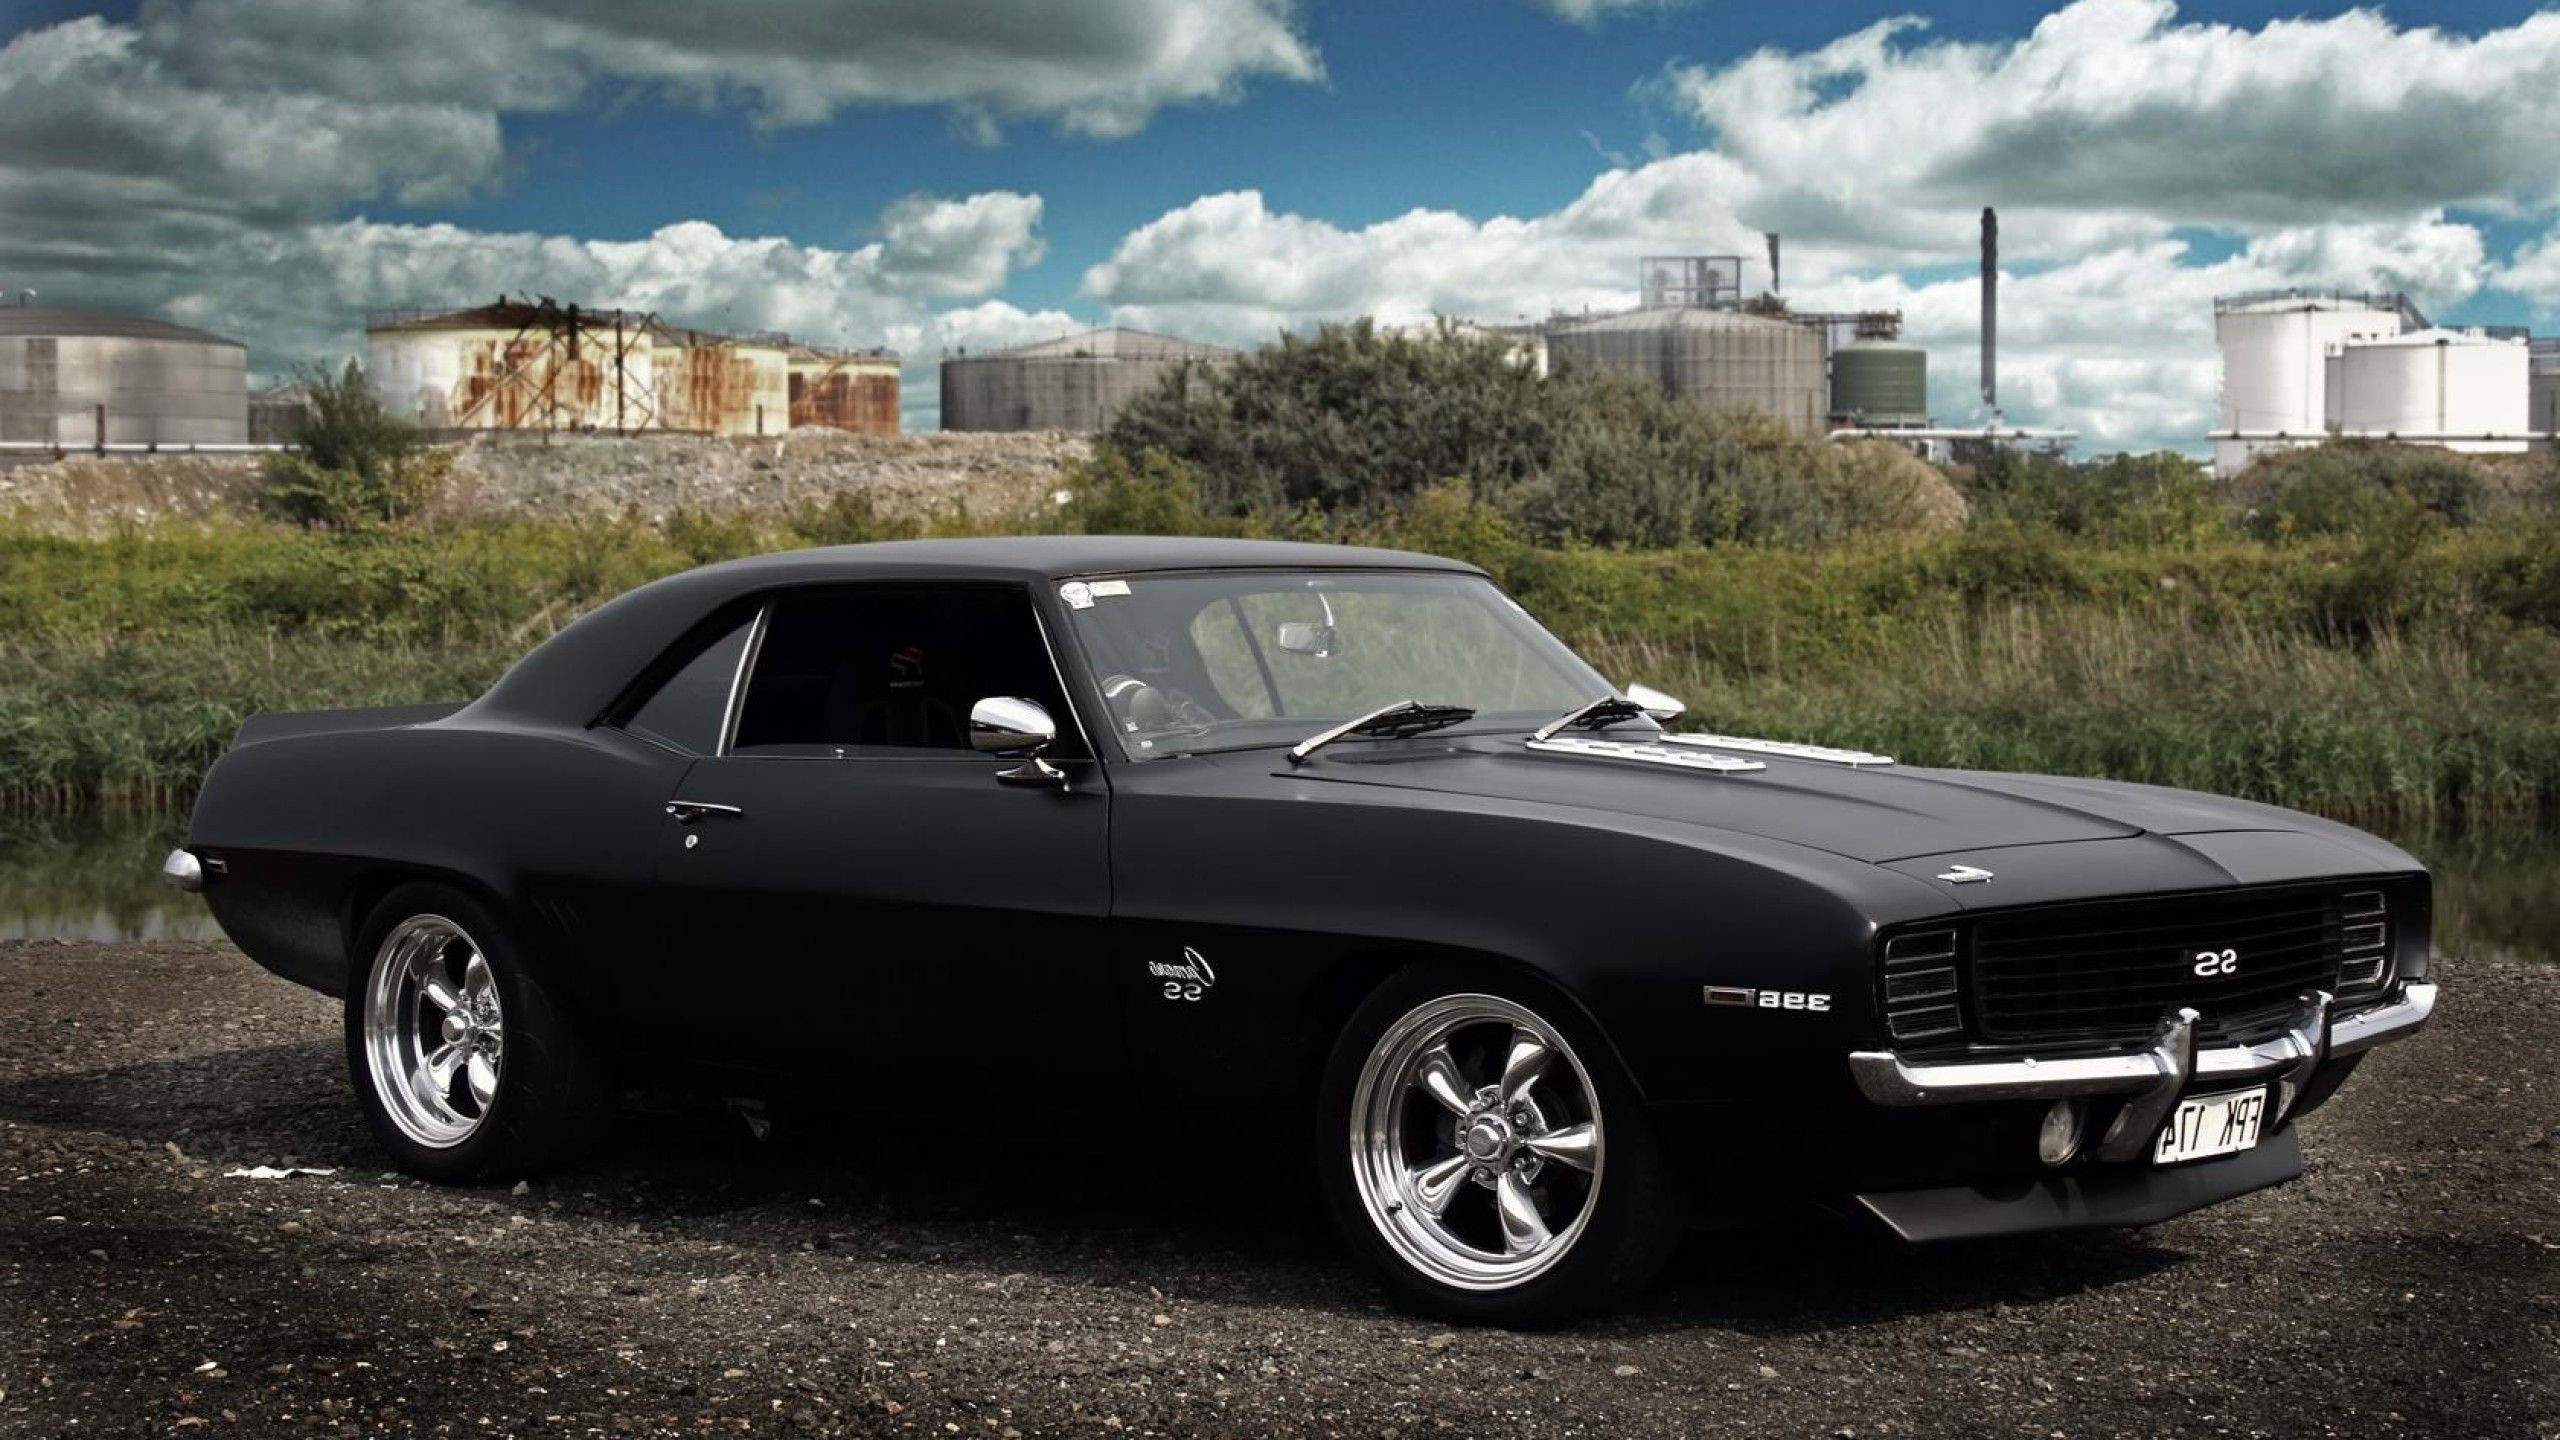 2560x1440 Resume Templates: Muscle car wallpapers for laptop